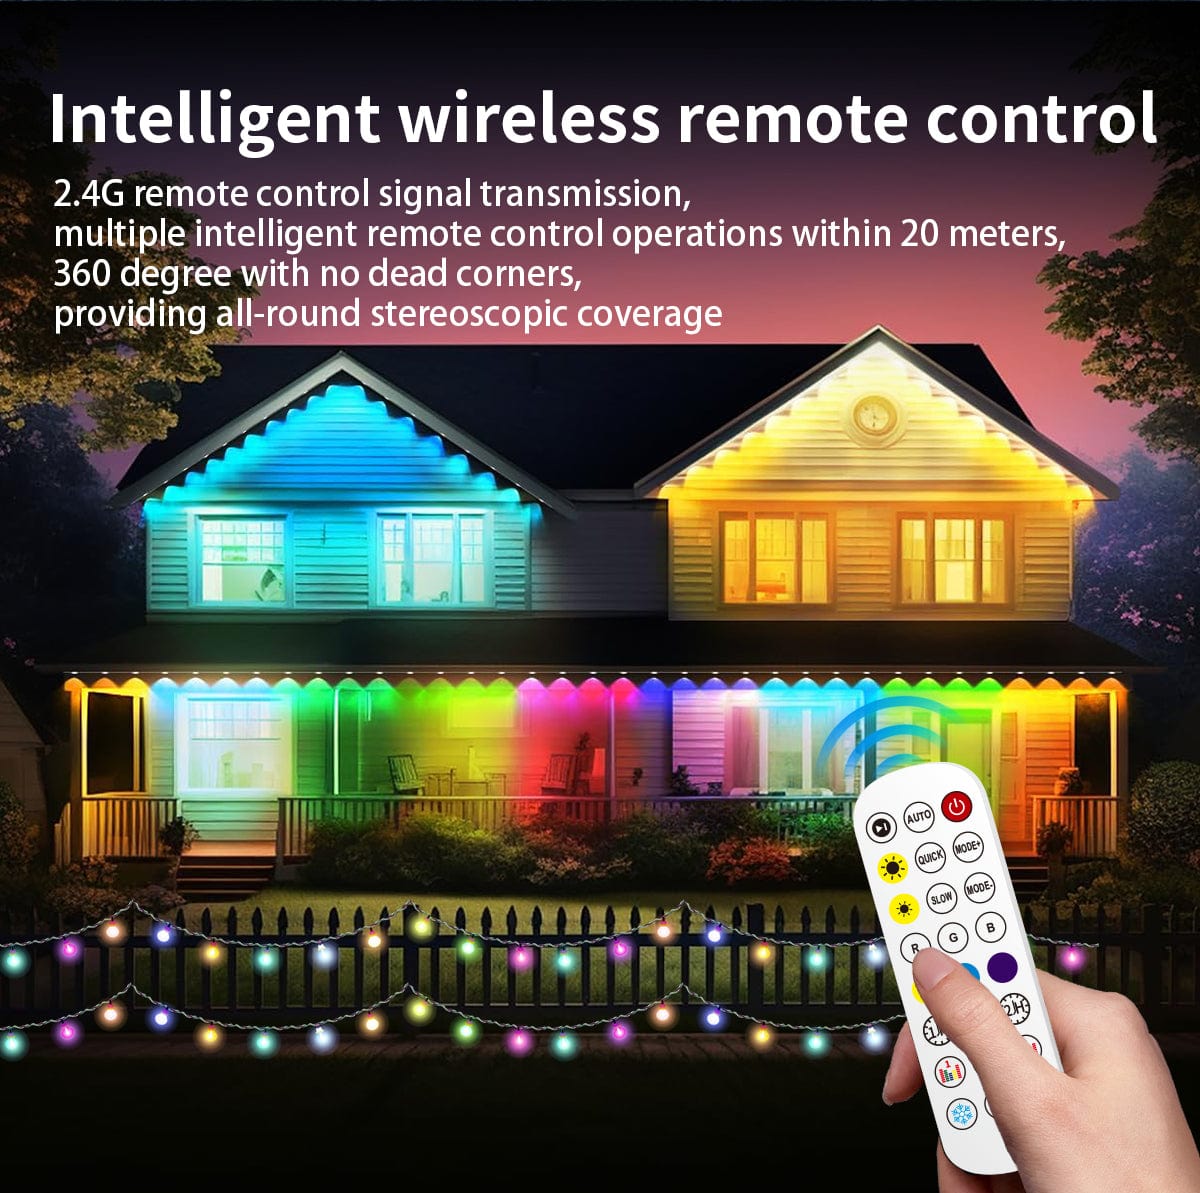 ZOOBERS Permanent Outdoor Lights - 50 ft/15 m RGBIC LED String, 30 LED Warm White Eave Lights, App & Remote Control - IP67 Waterproof with 75 Scene Modes for Outdoor Decorations ZOOBERS